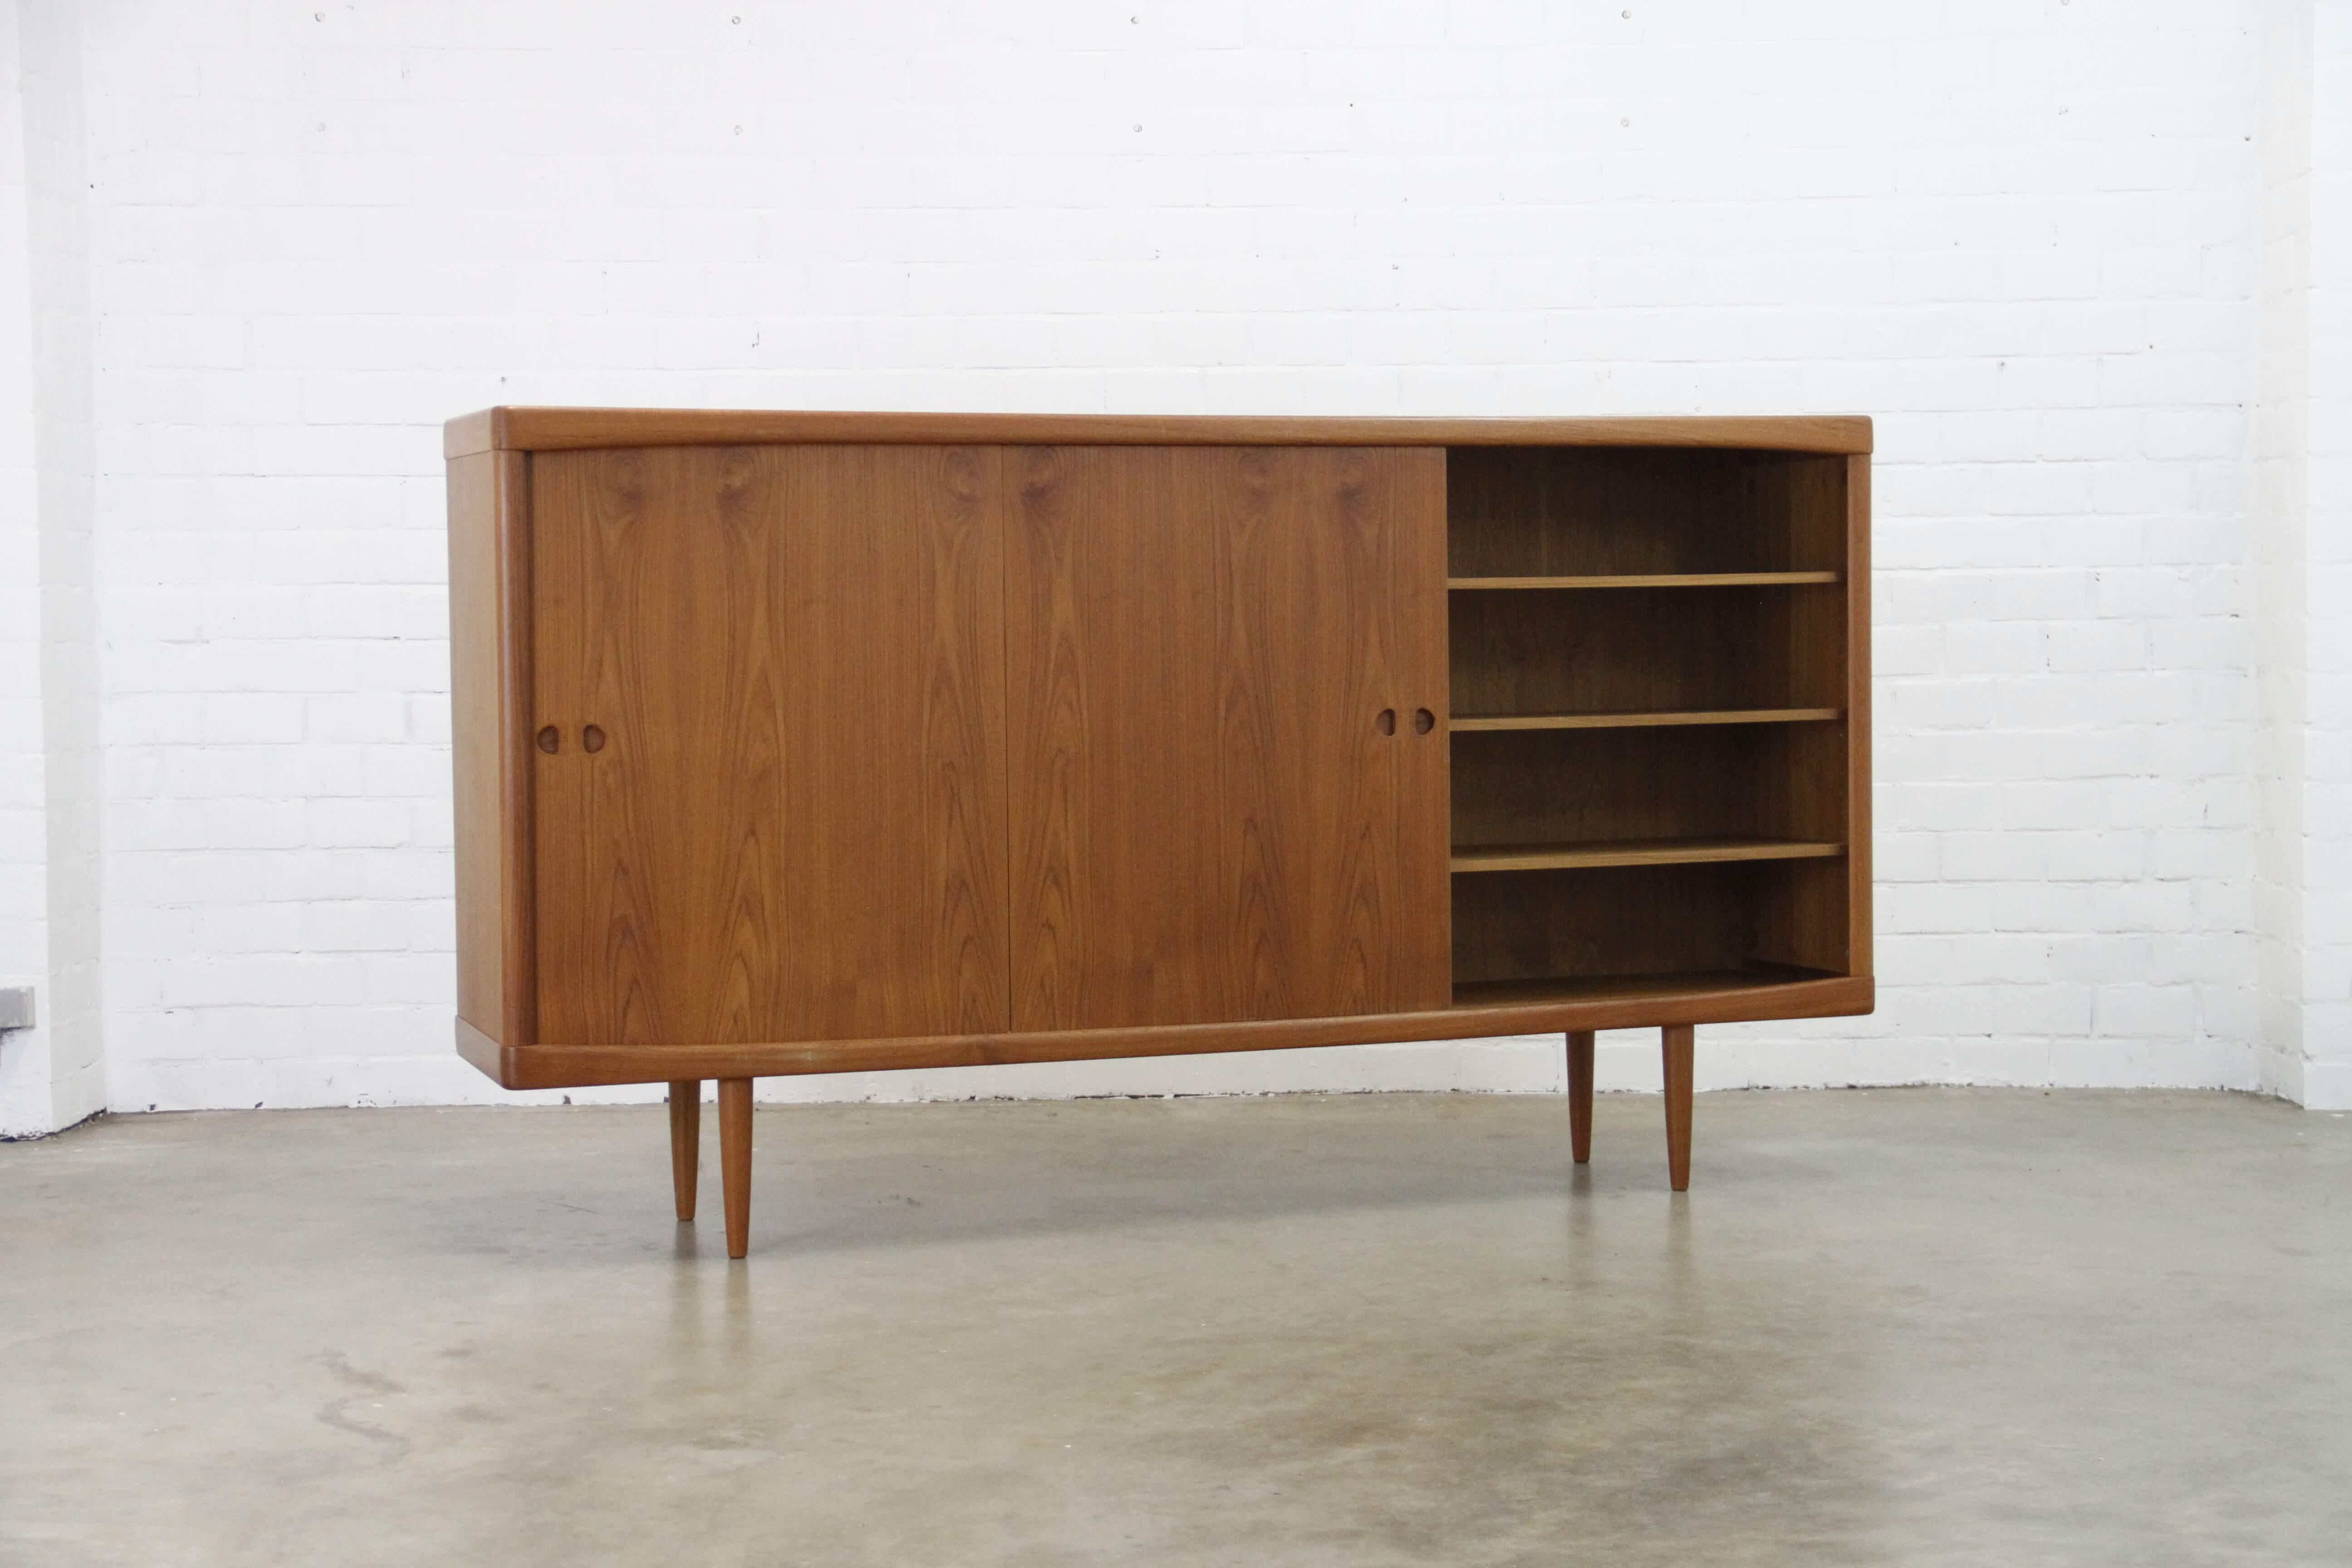 This highboard was designed by Henry W Klein for Bramin, Denmark.
There are two sliding doors, four drawers and a swing door with a bar section.
The highboard is of very high quality and in very good condition.
Finished in teak.